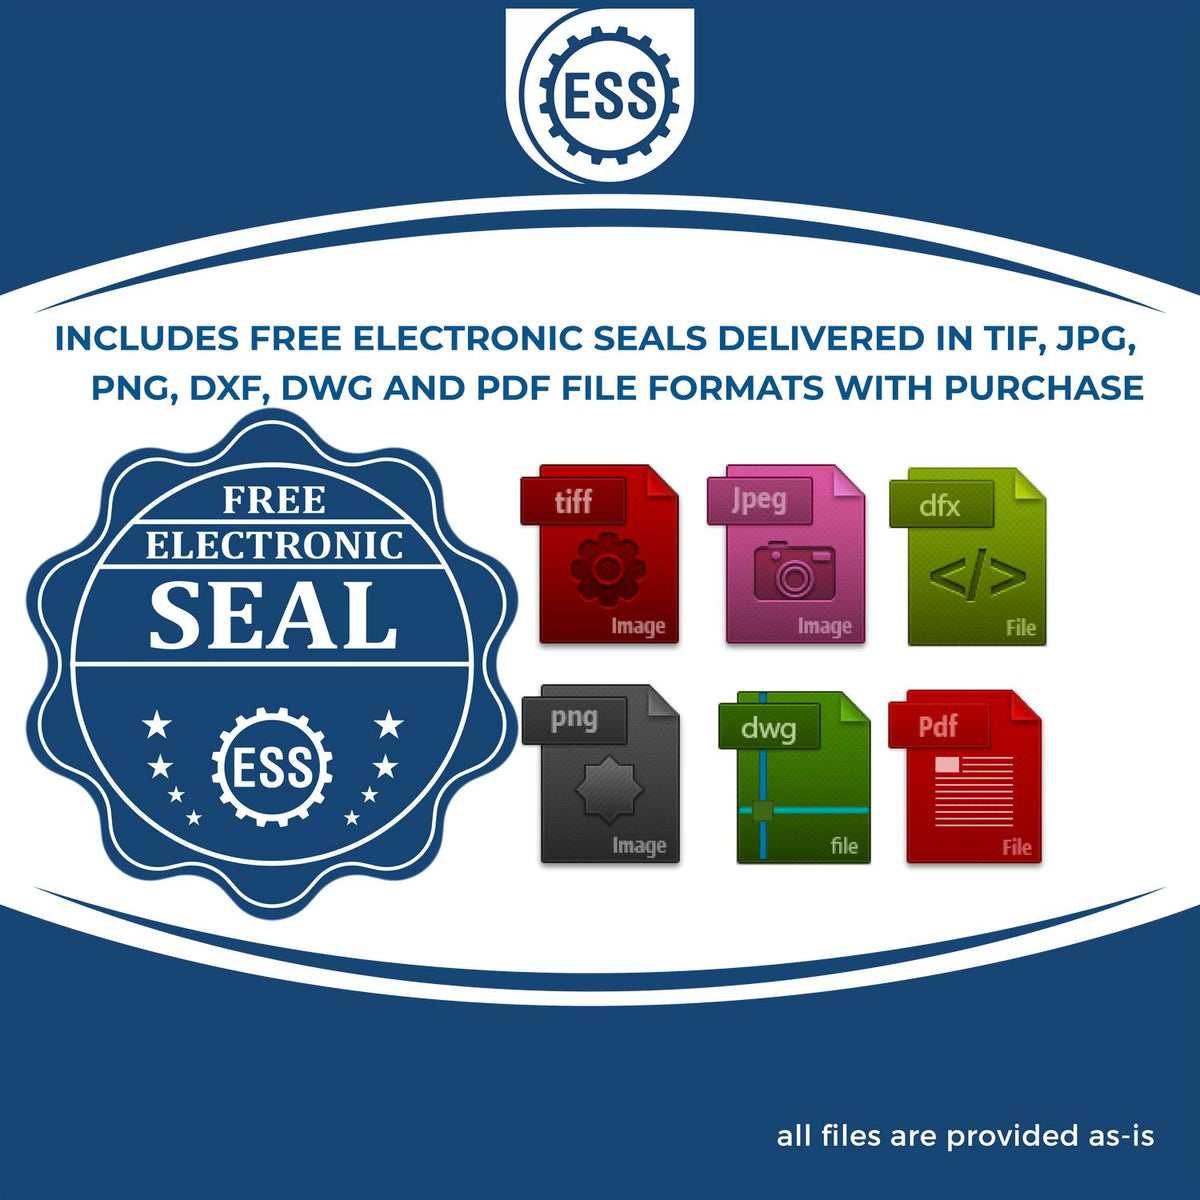 An infographic for the free electronic seal for the Slim Pre-Inked Kentucky Landscape Architect Seal Stamp illustrating the different file type icons such as DXF, DWG, TIF, JPG and PNG.